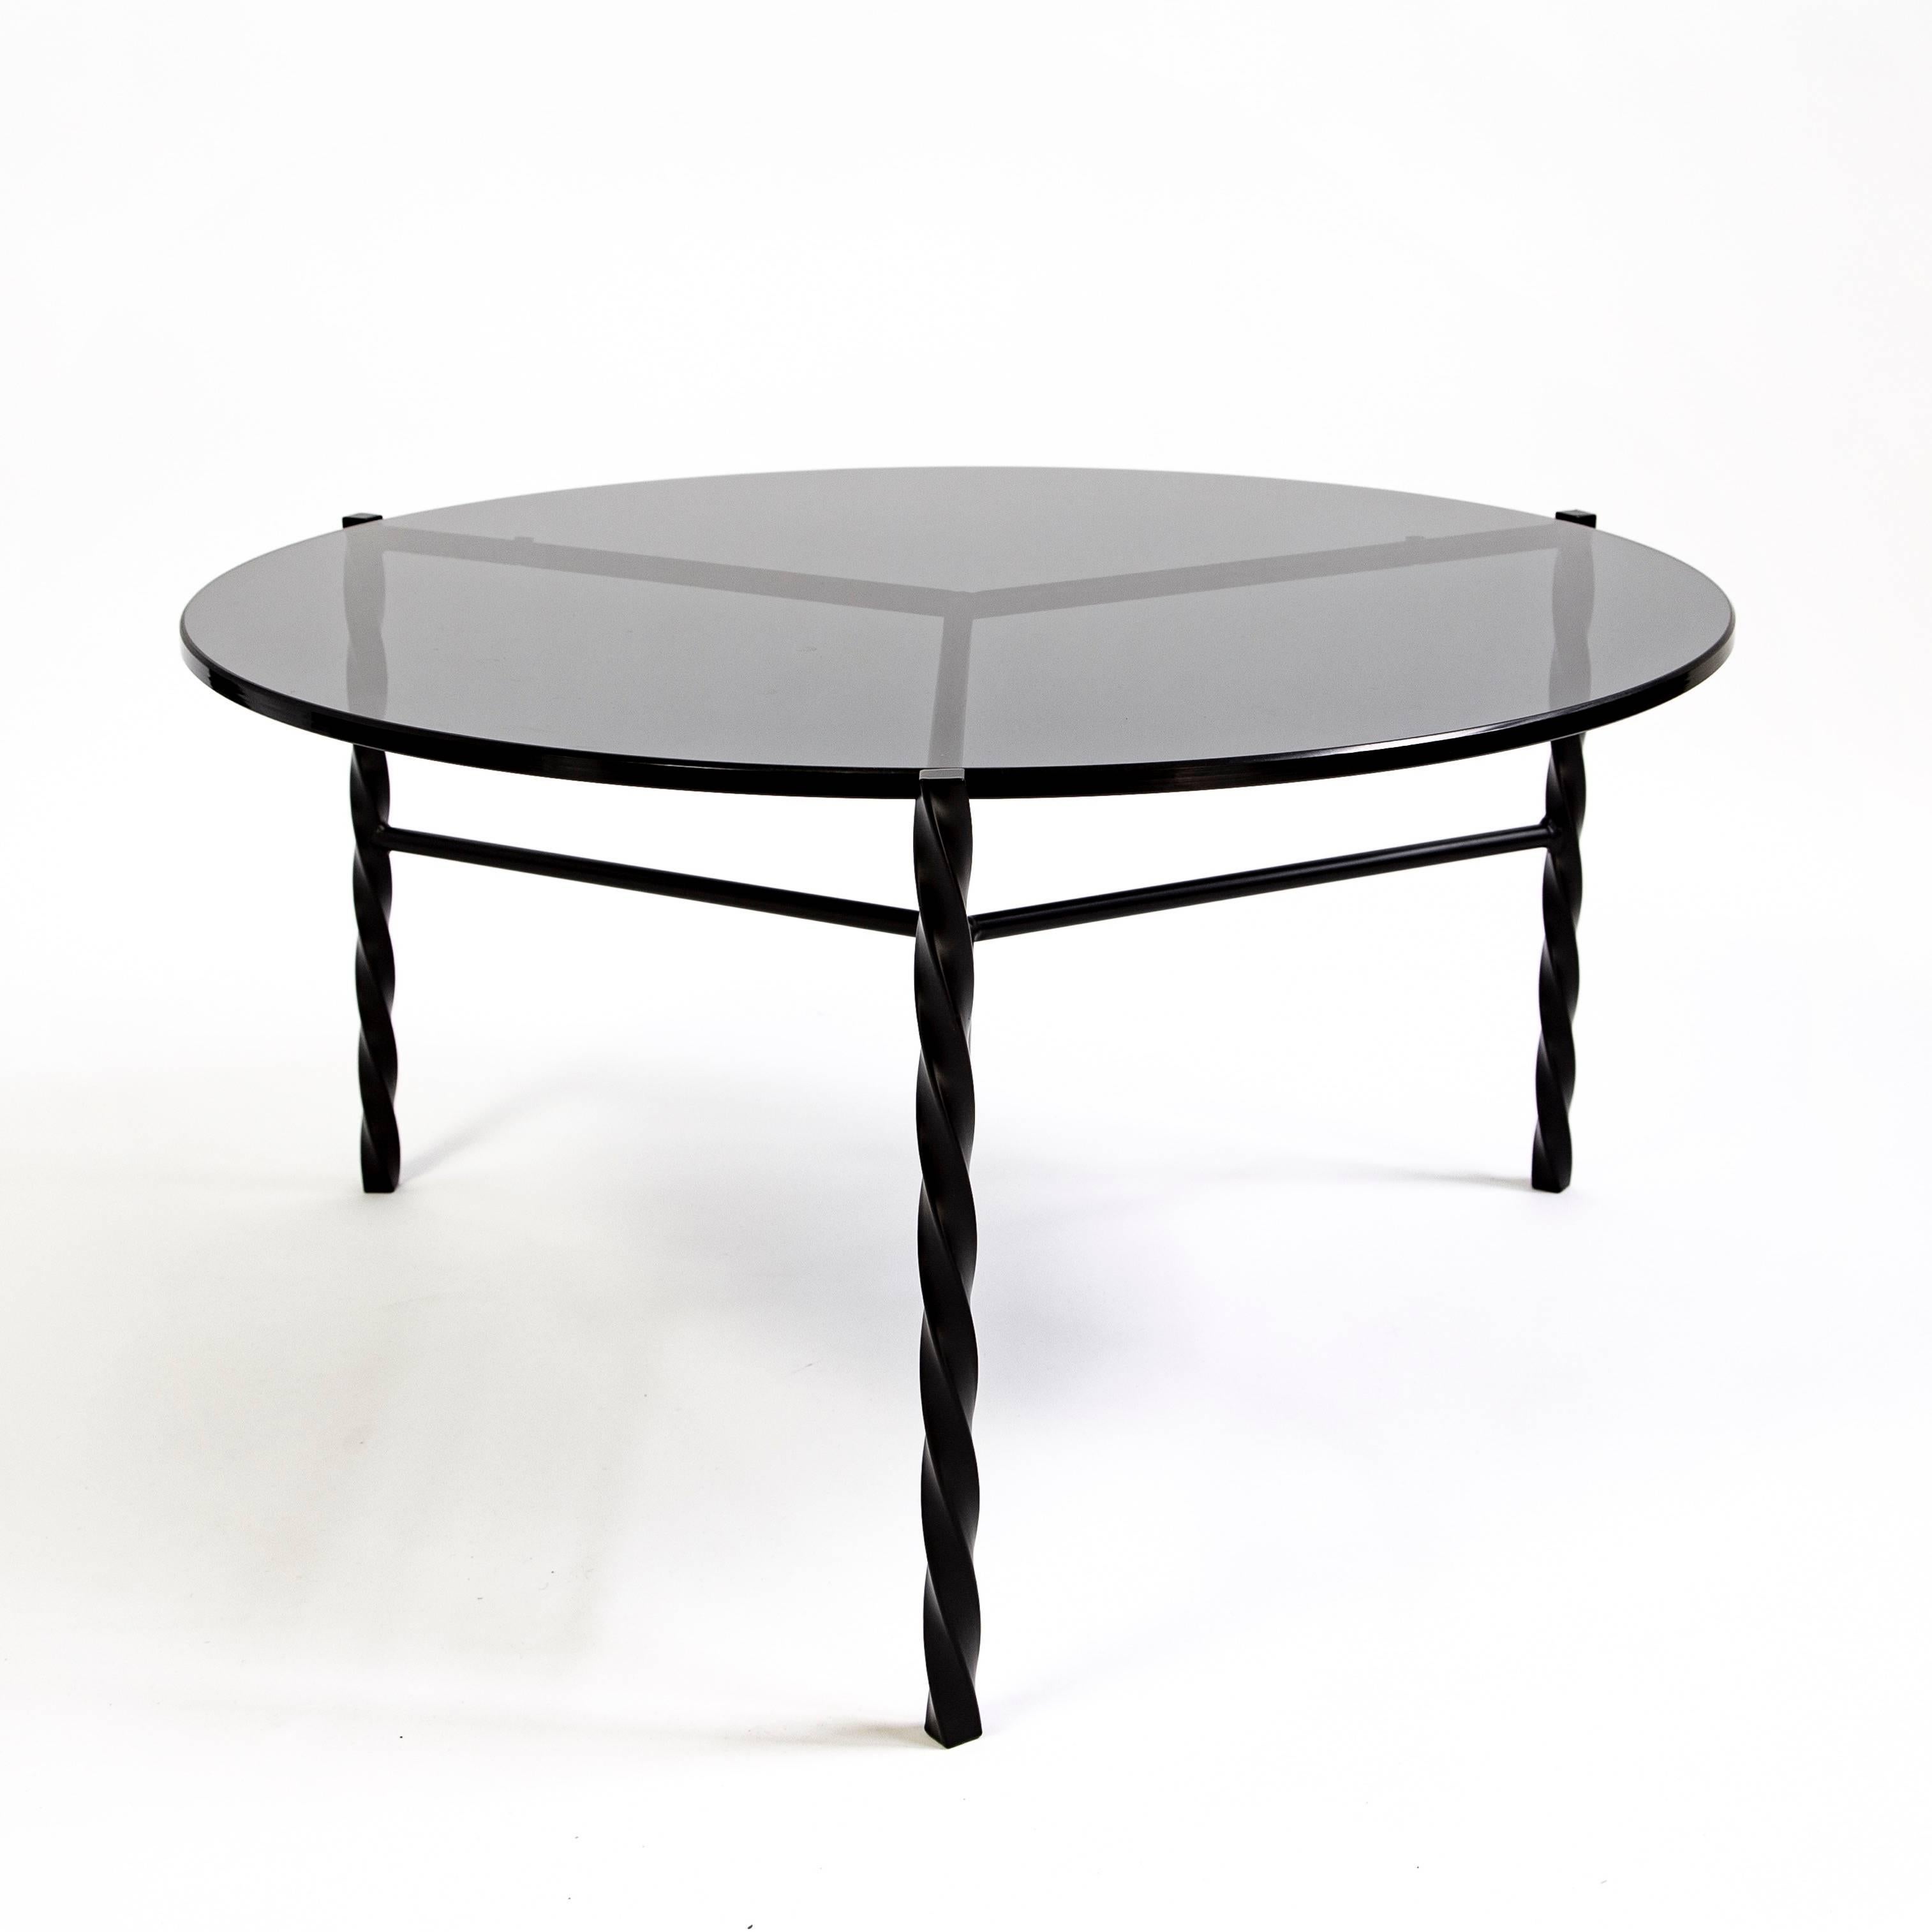 Powder-Coated Von Iron Coffee Table from Souda, Black and Glass, Floor Model